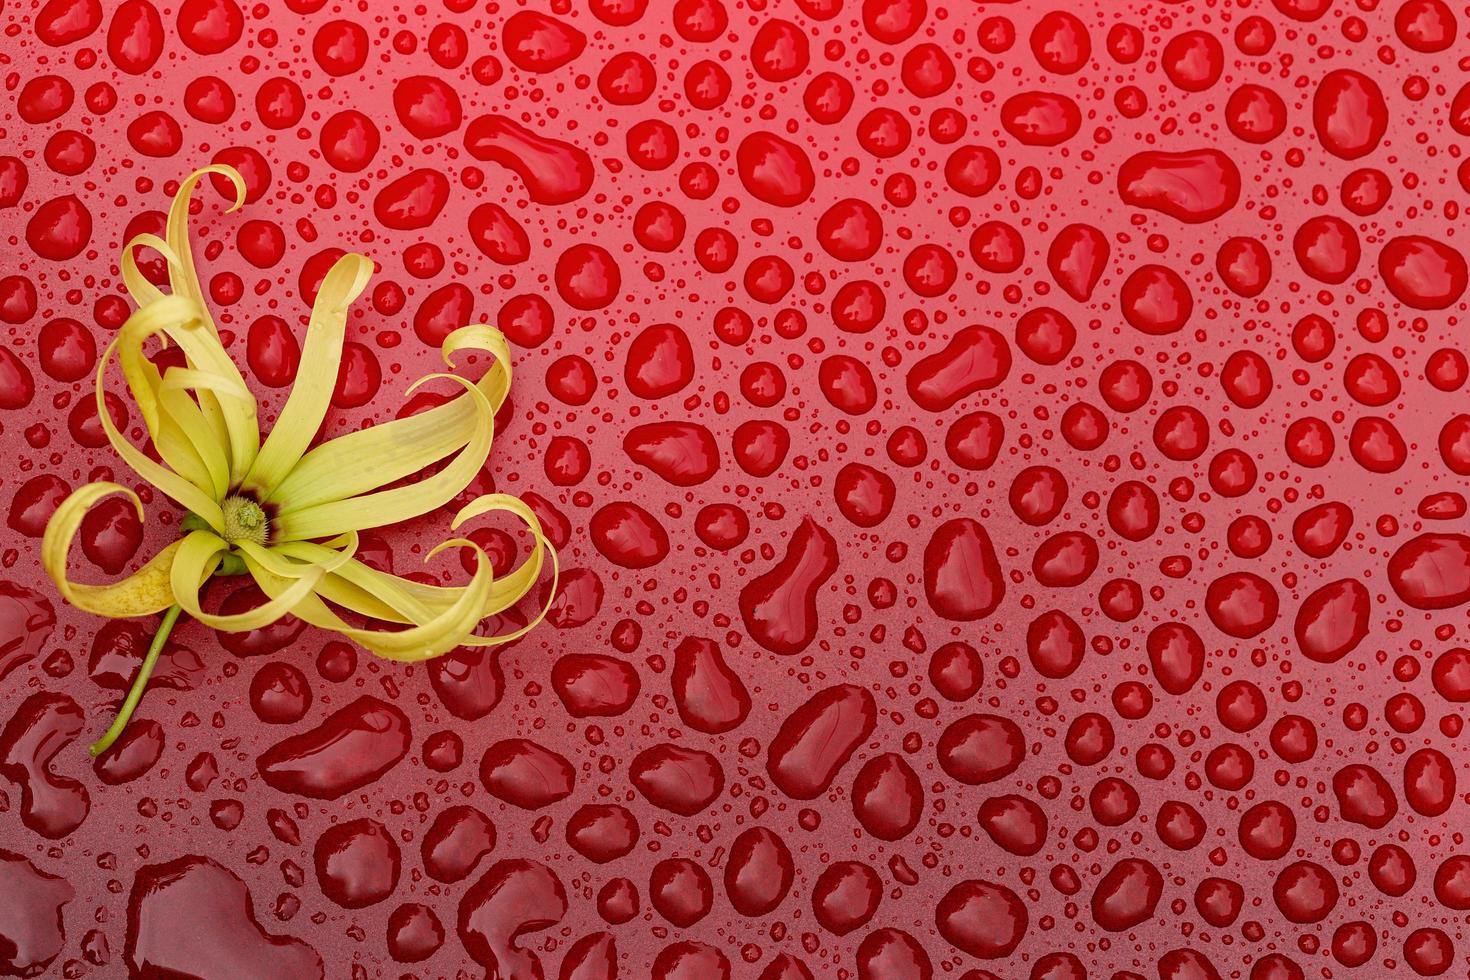 Small flowers on Red Water drops blackground photo